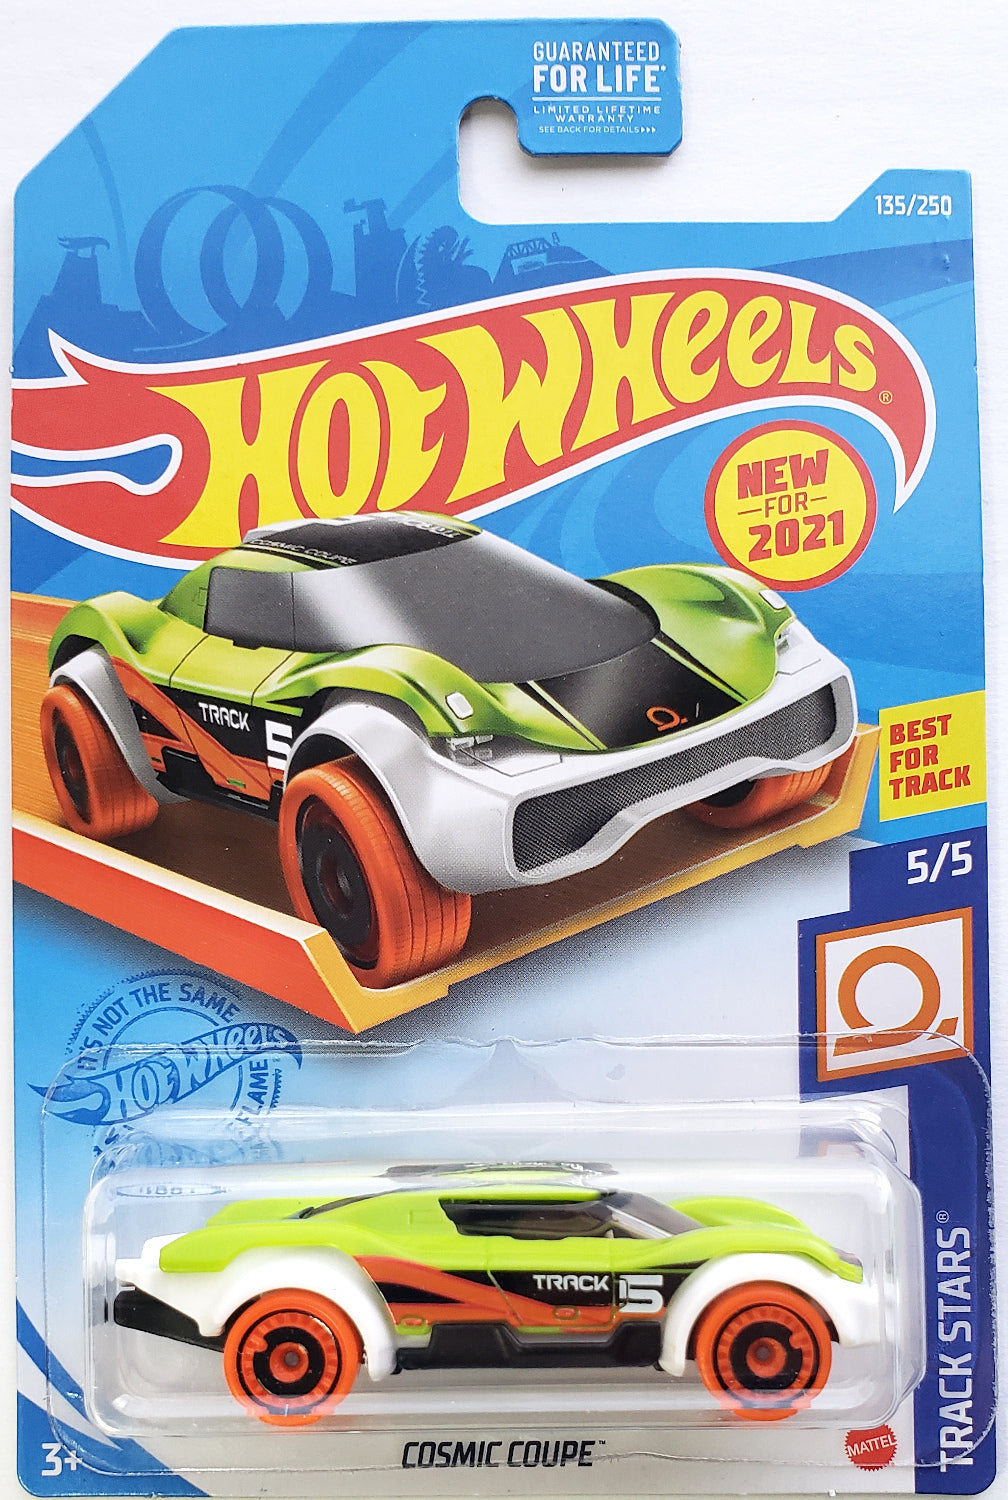 Hot Wheels 2021 - Collector # 135/250 - Track Stars 5/5 - New Models - Cosmic Coupe - Green